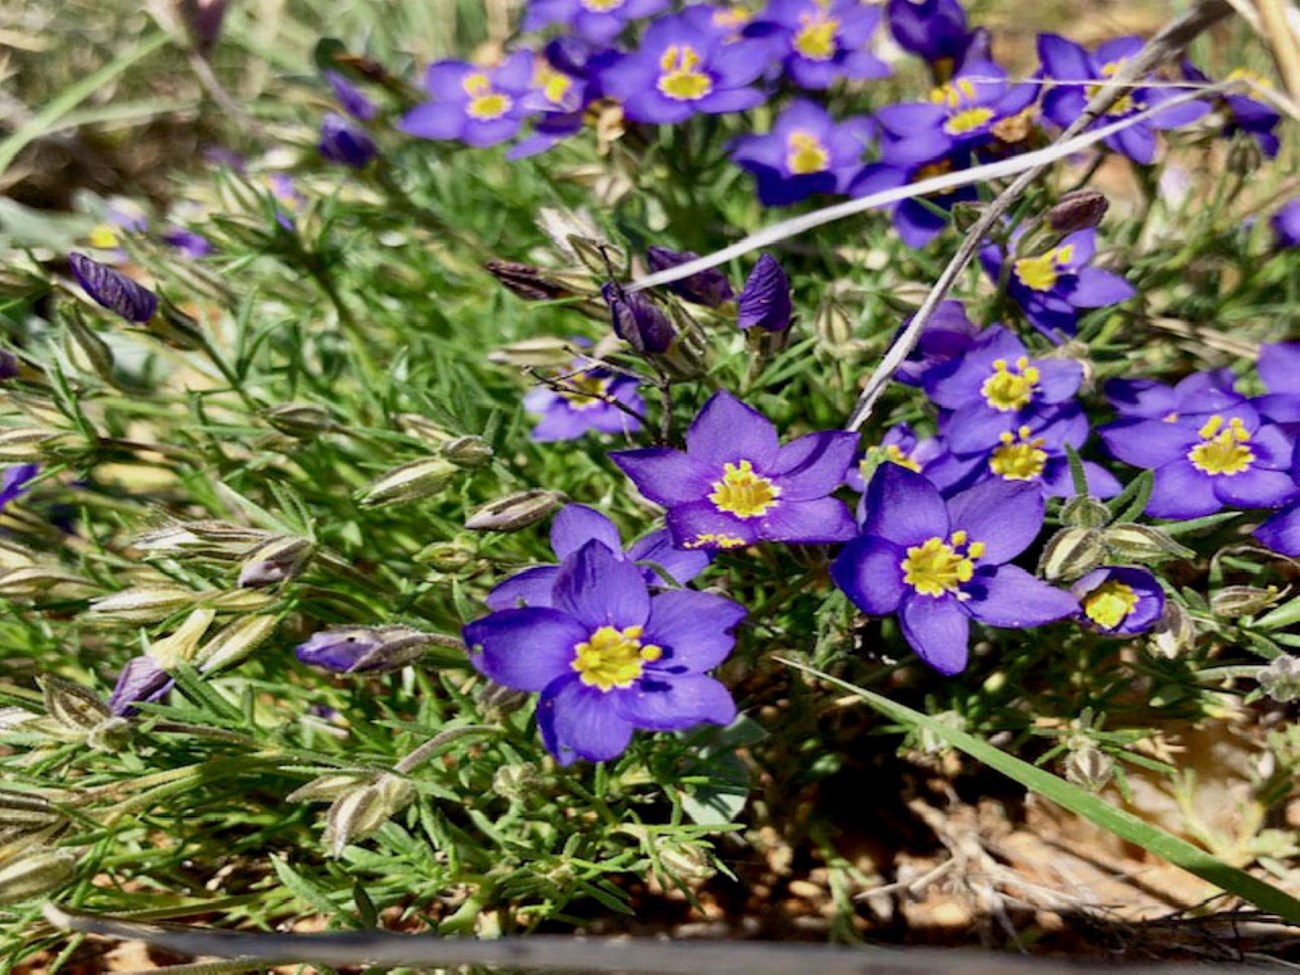 A group of Blue Gilia flowers in a red bed of dirt.